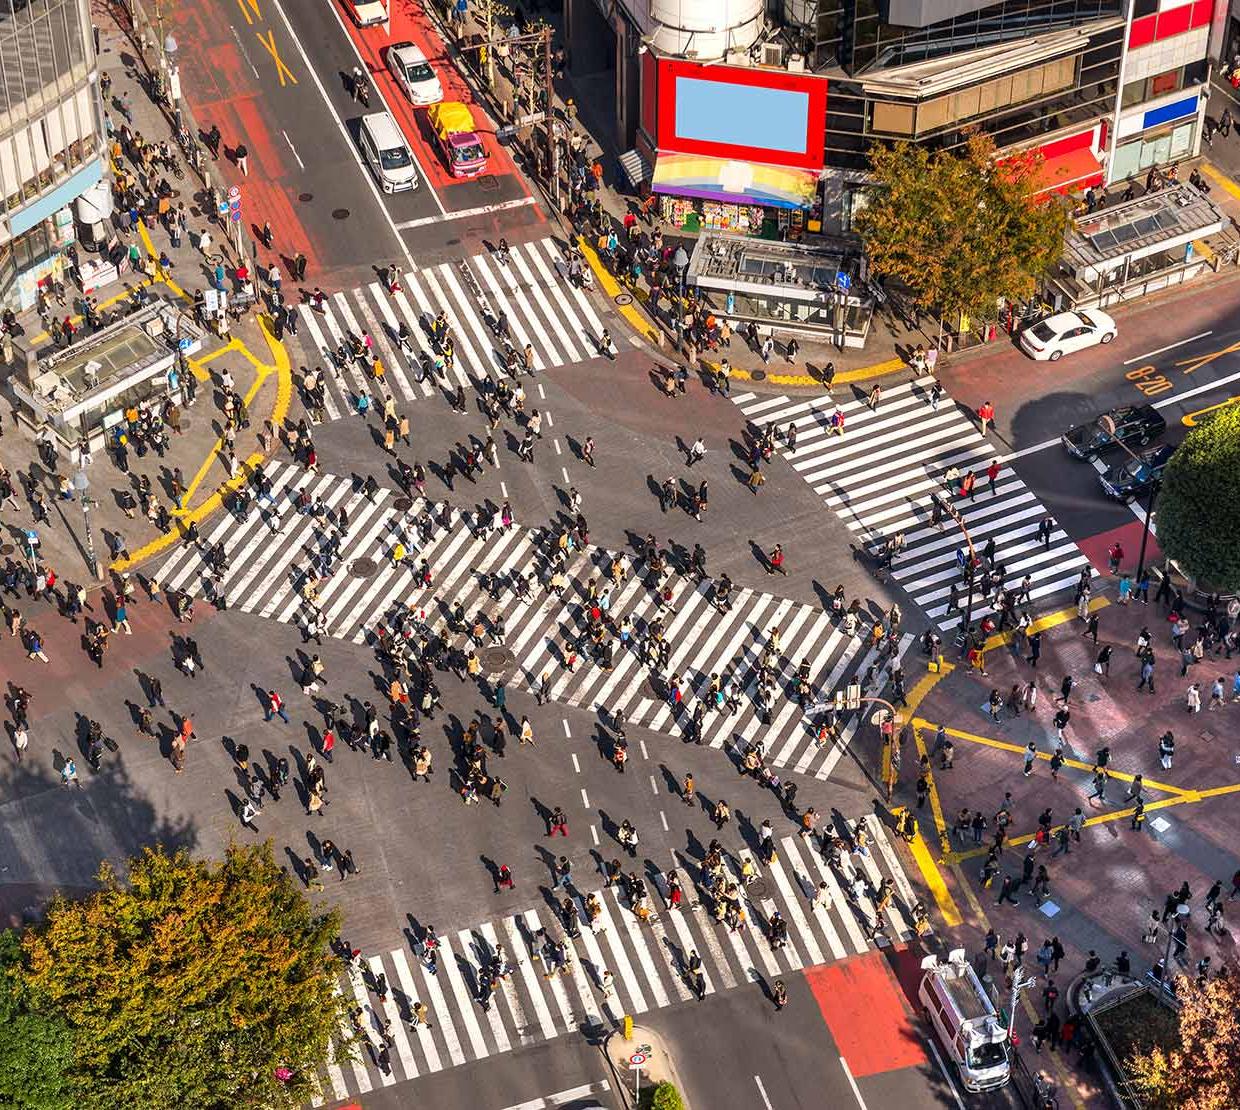 arial view of citizens walking through busy intersection in Japan